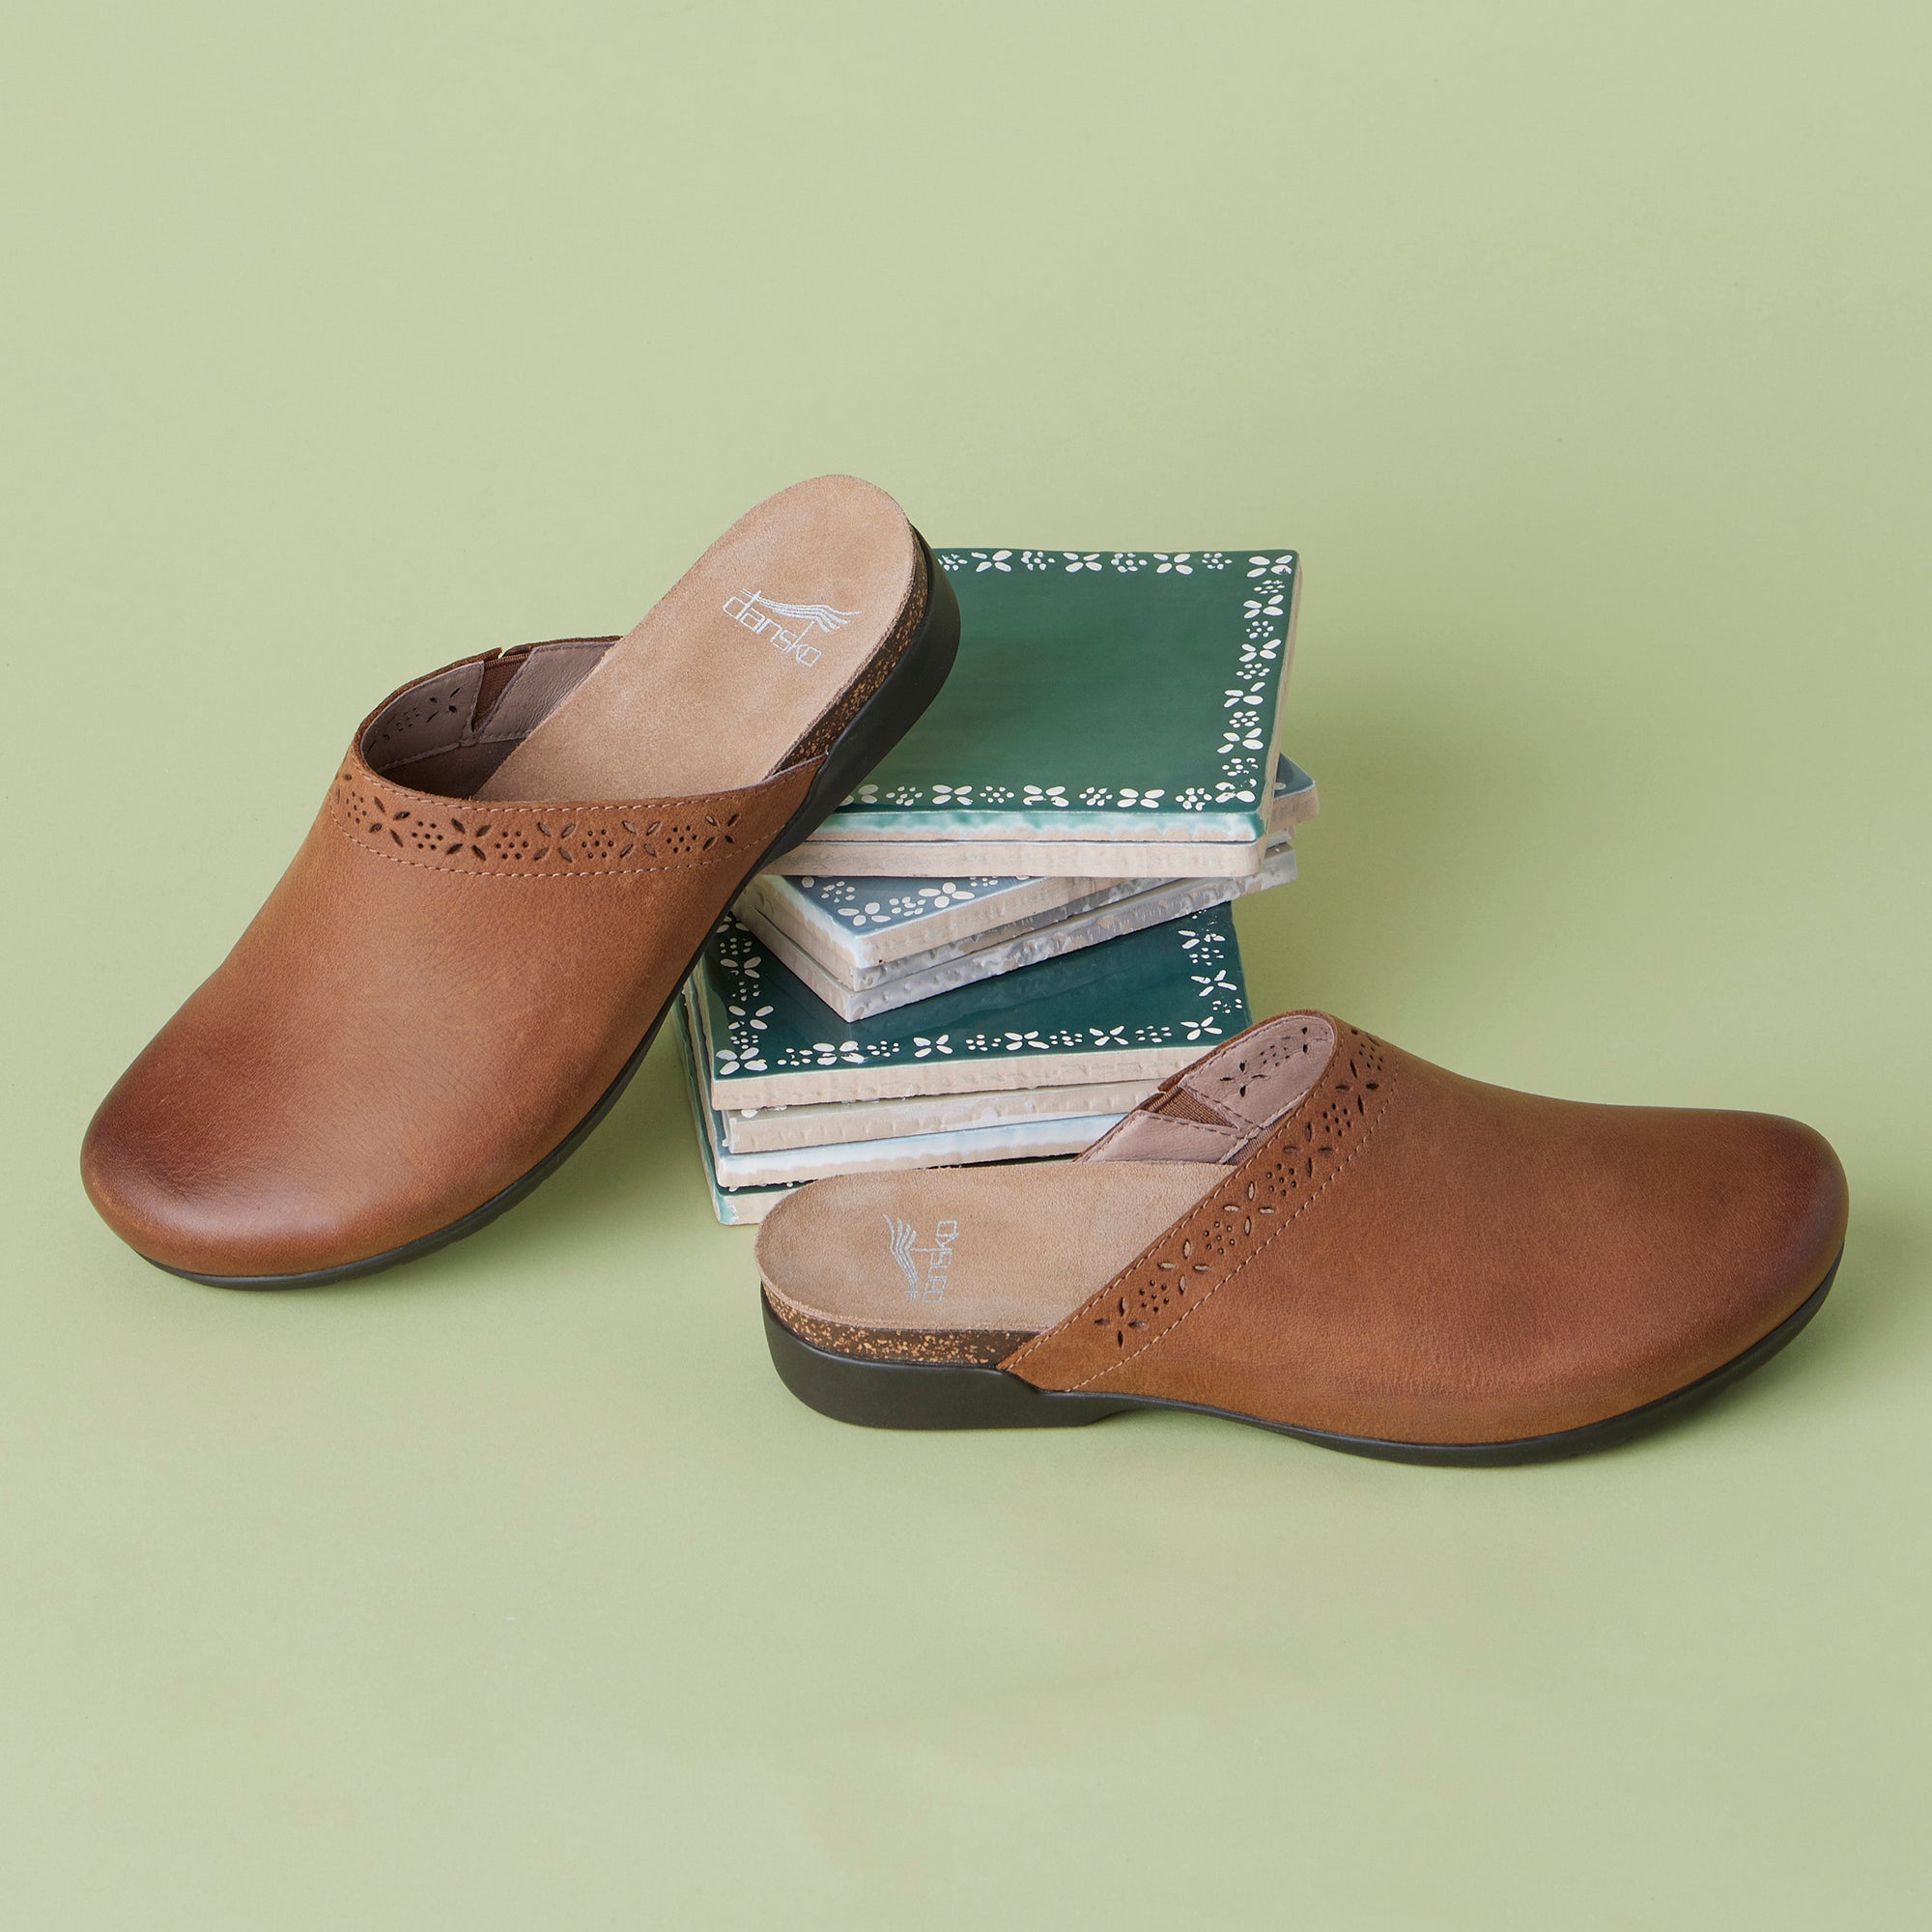 Brown leather slip-on mule shown with printed detail that appears on the uppers.